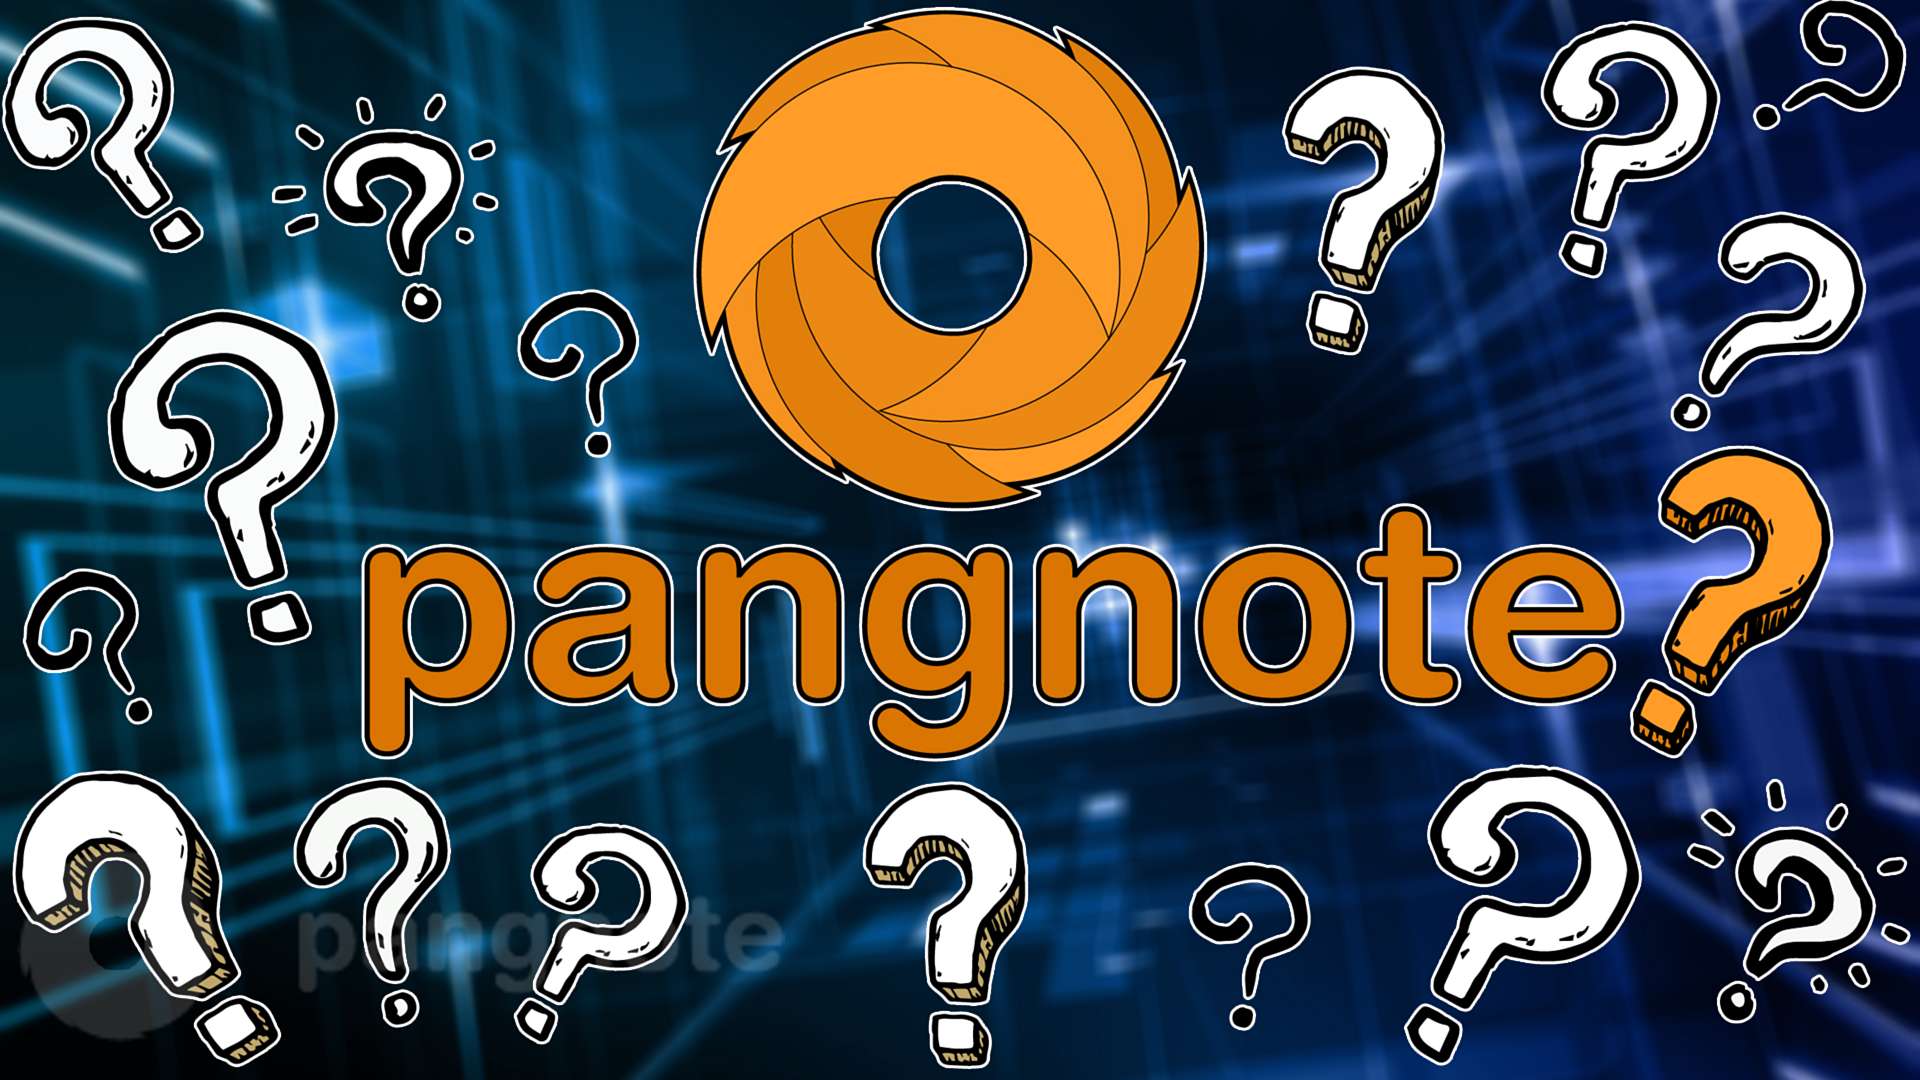 What for was Pangnote created for?